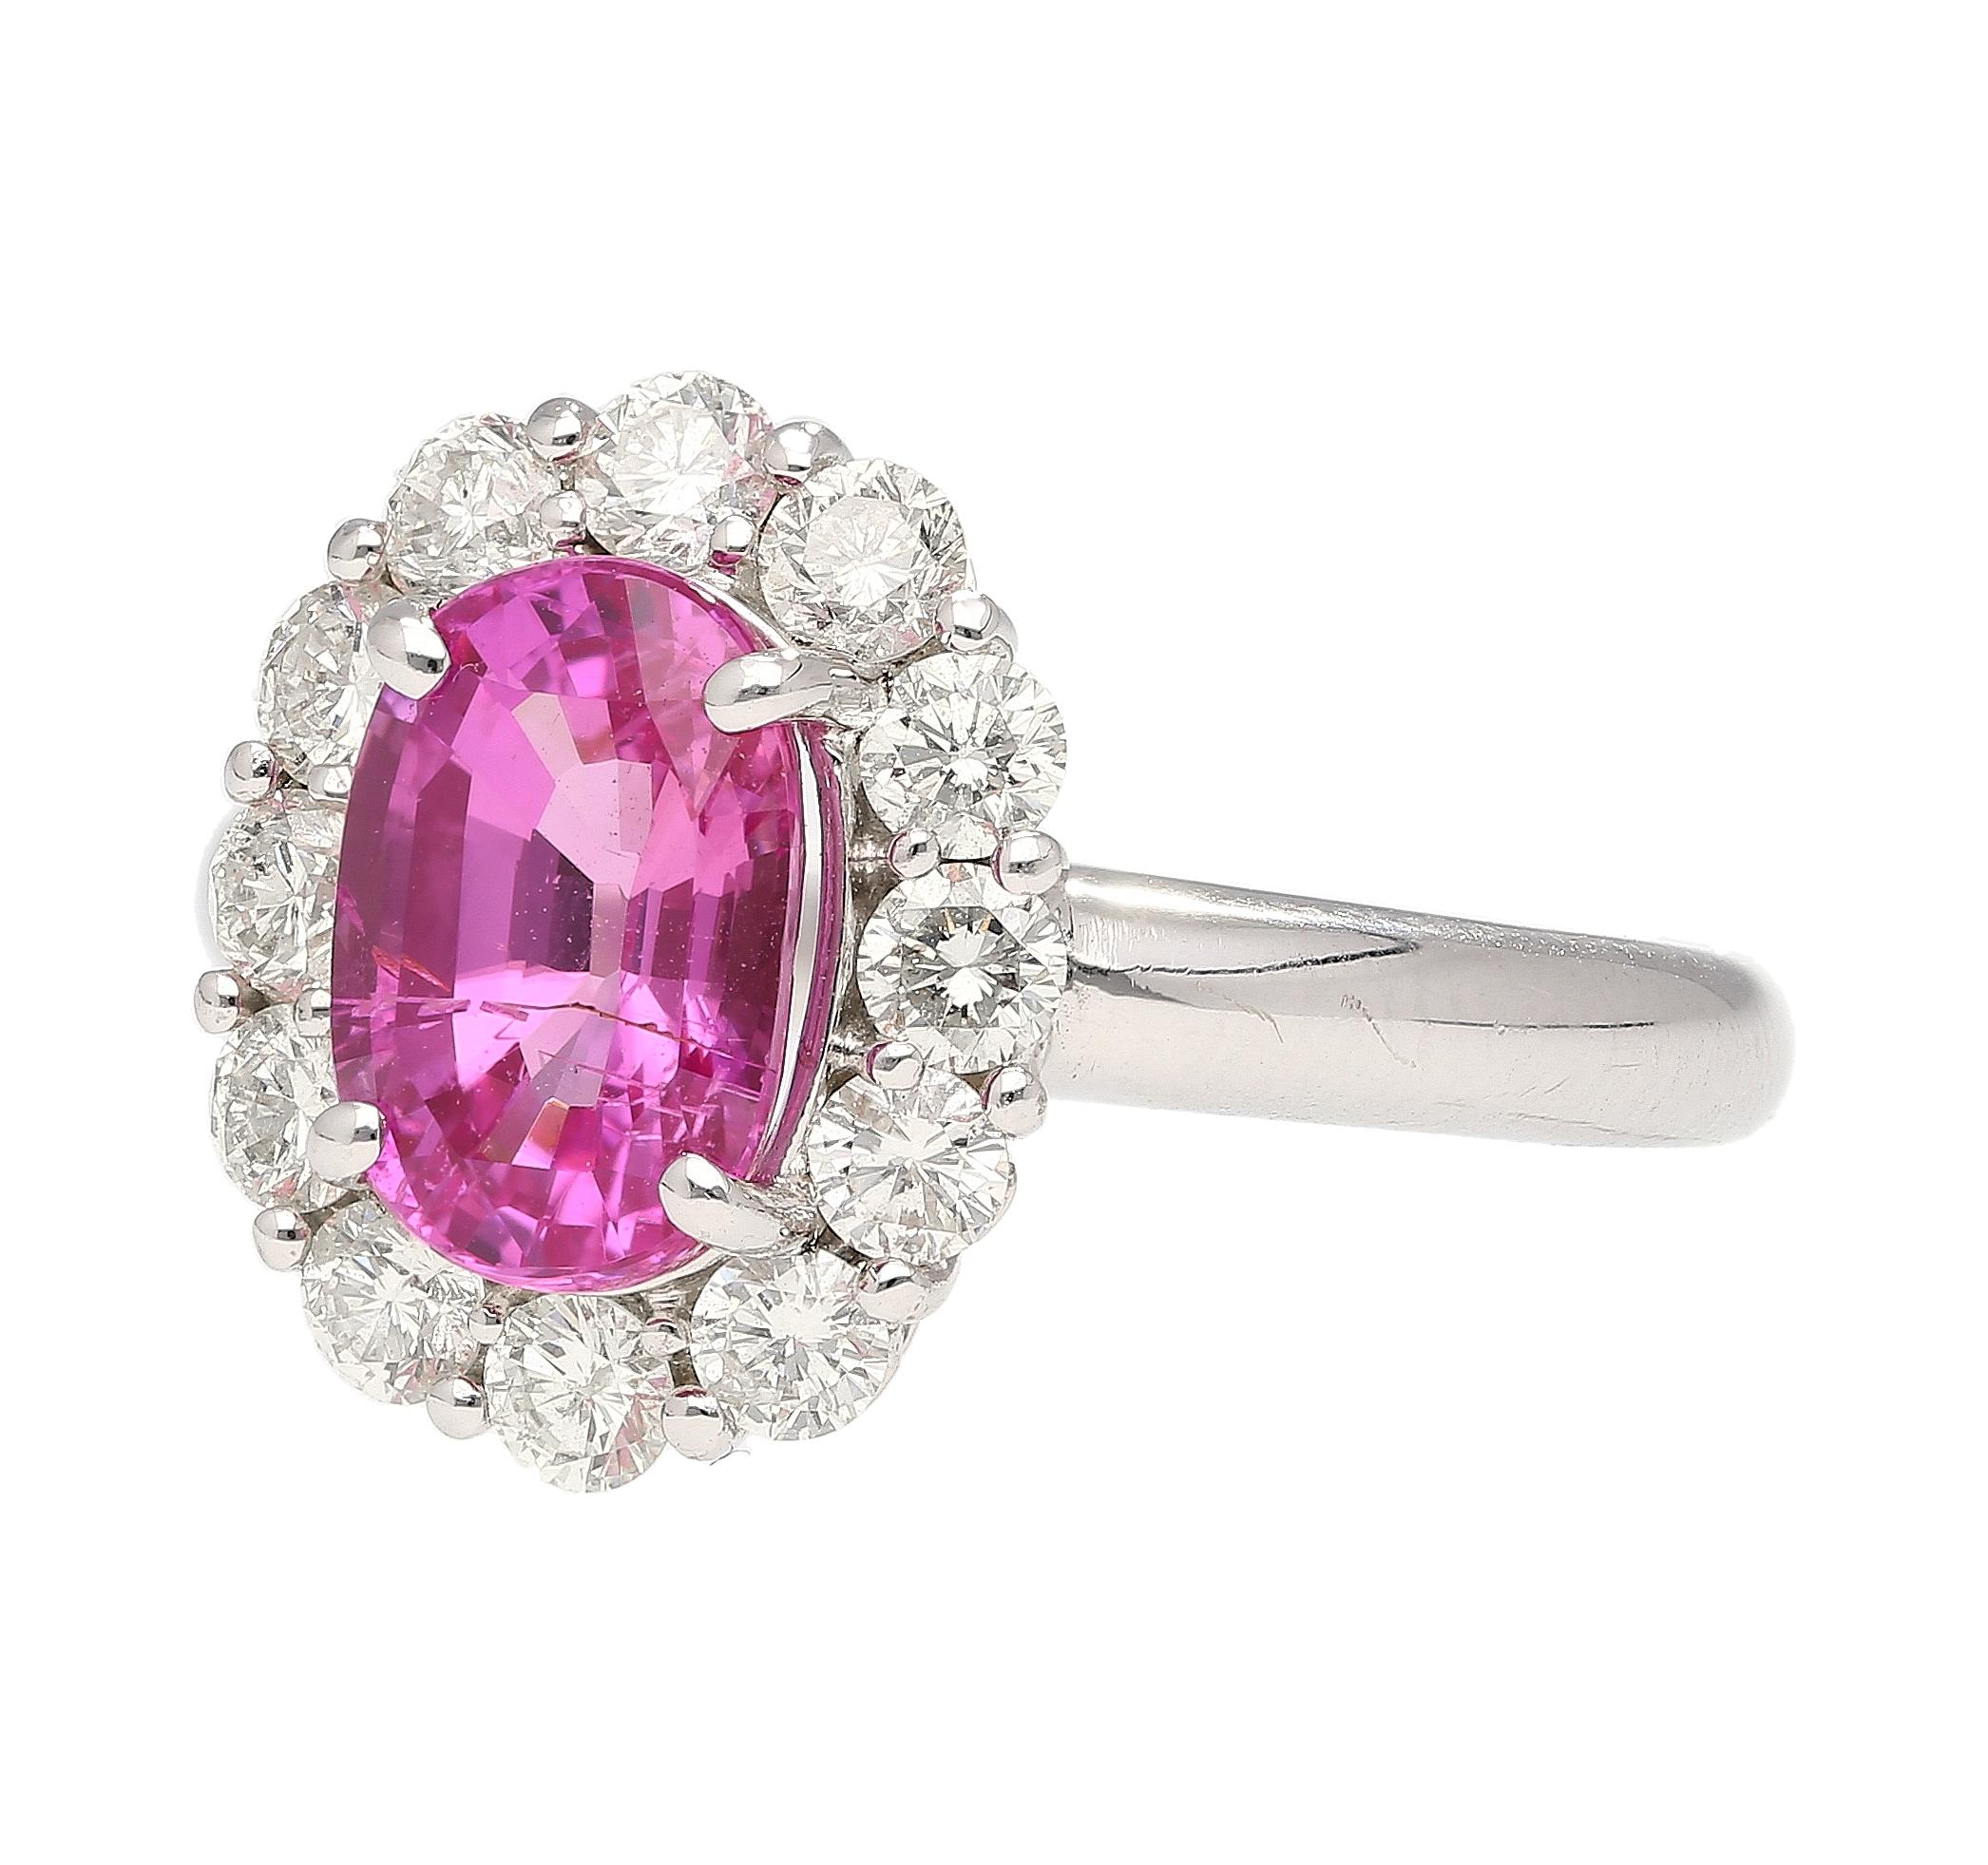 Art Deco 3.96 Carat Oval Cut Pink Sapphire and Diamond Halo Ring in 18k White Gold For Sale